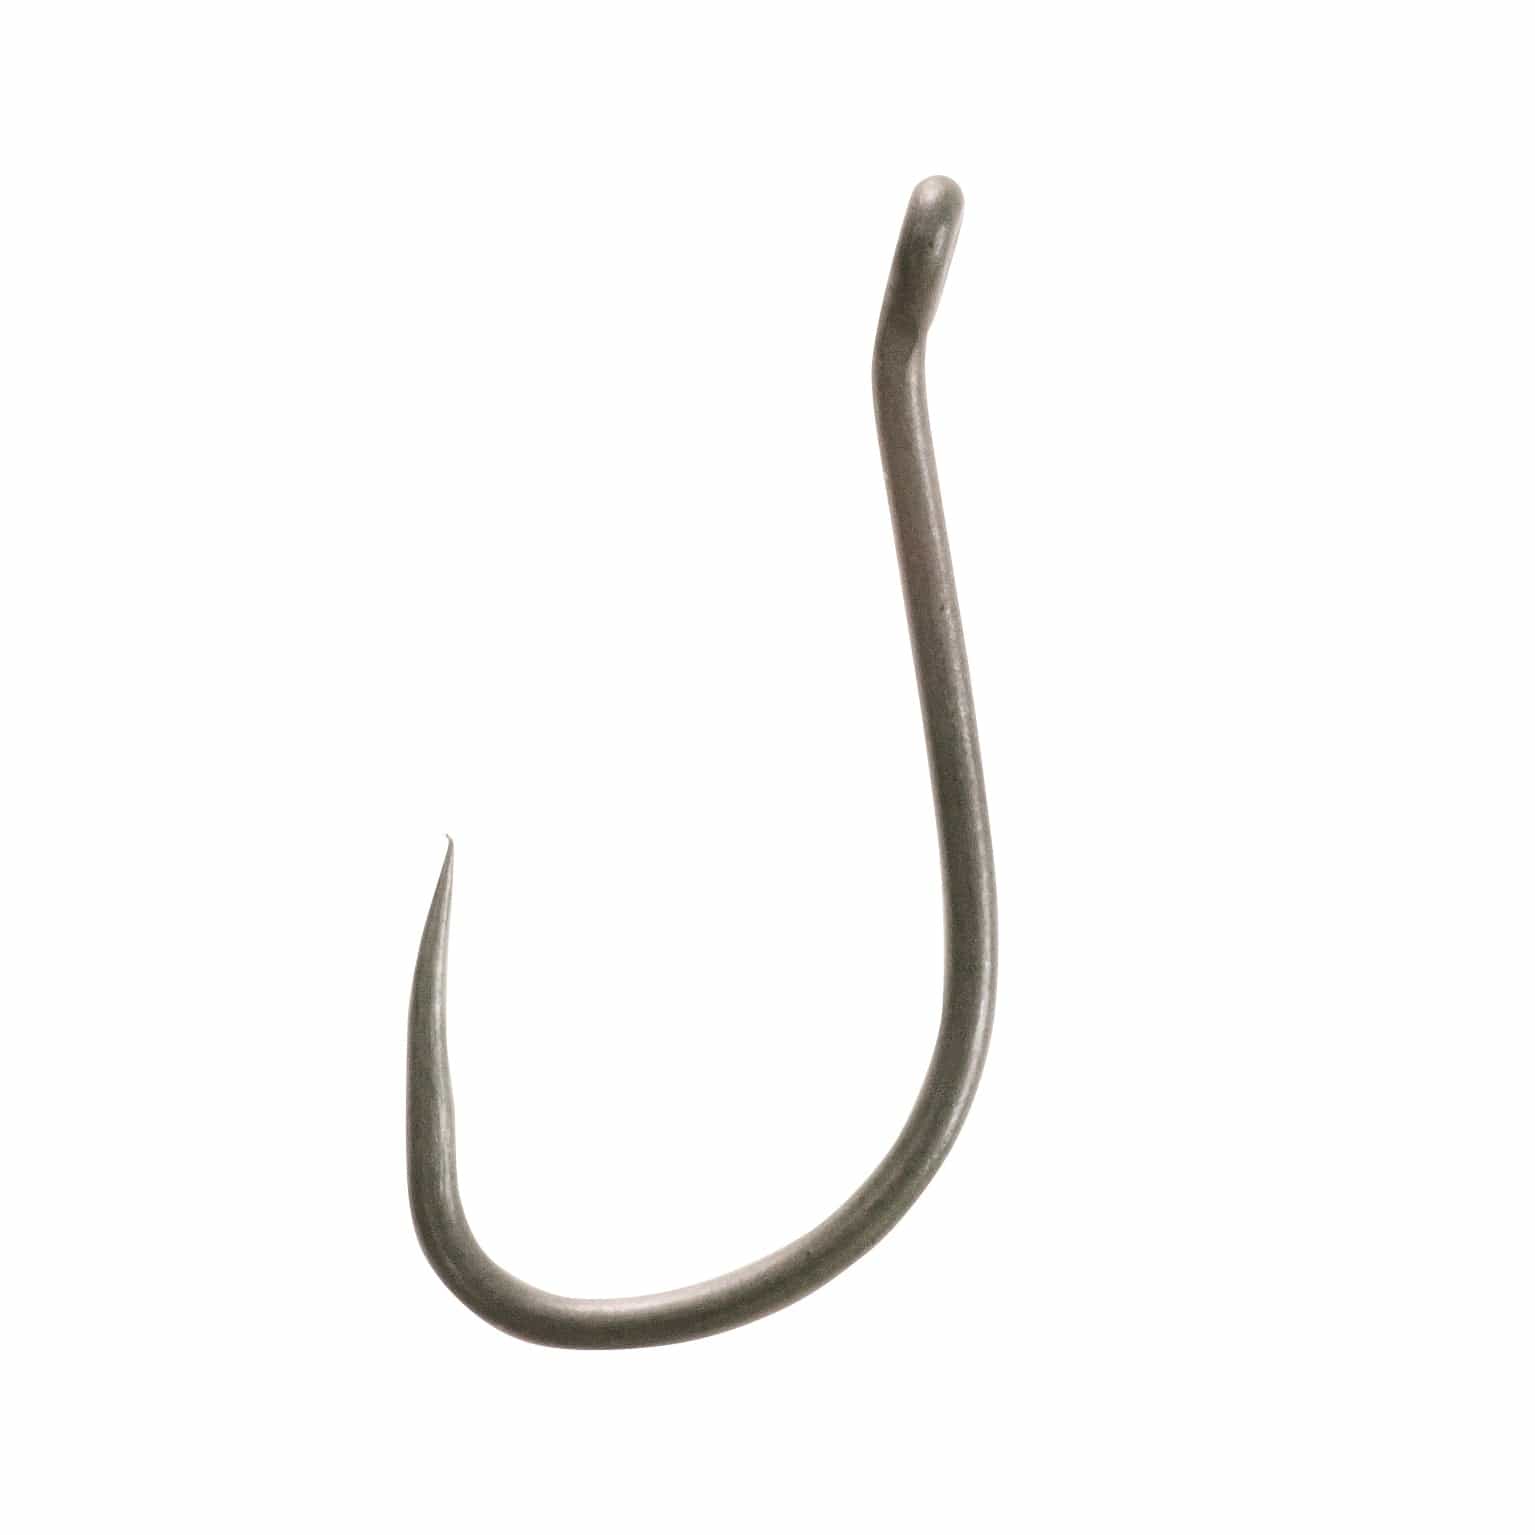 MIDDY KM-2 Hair-Rig Eyed Hooks size 20  (10pc pkt).